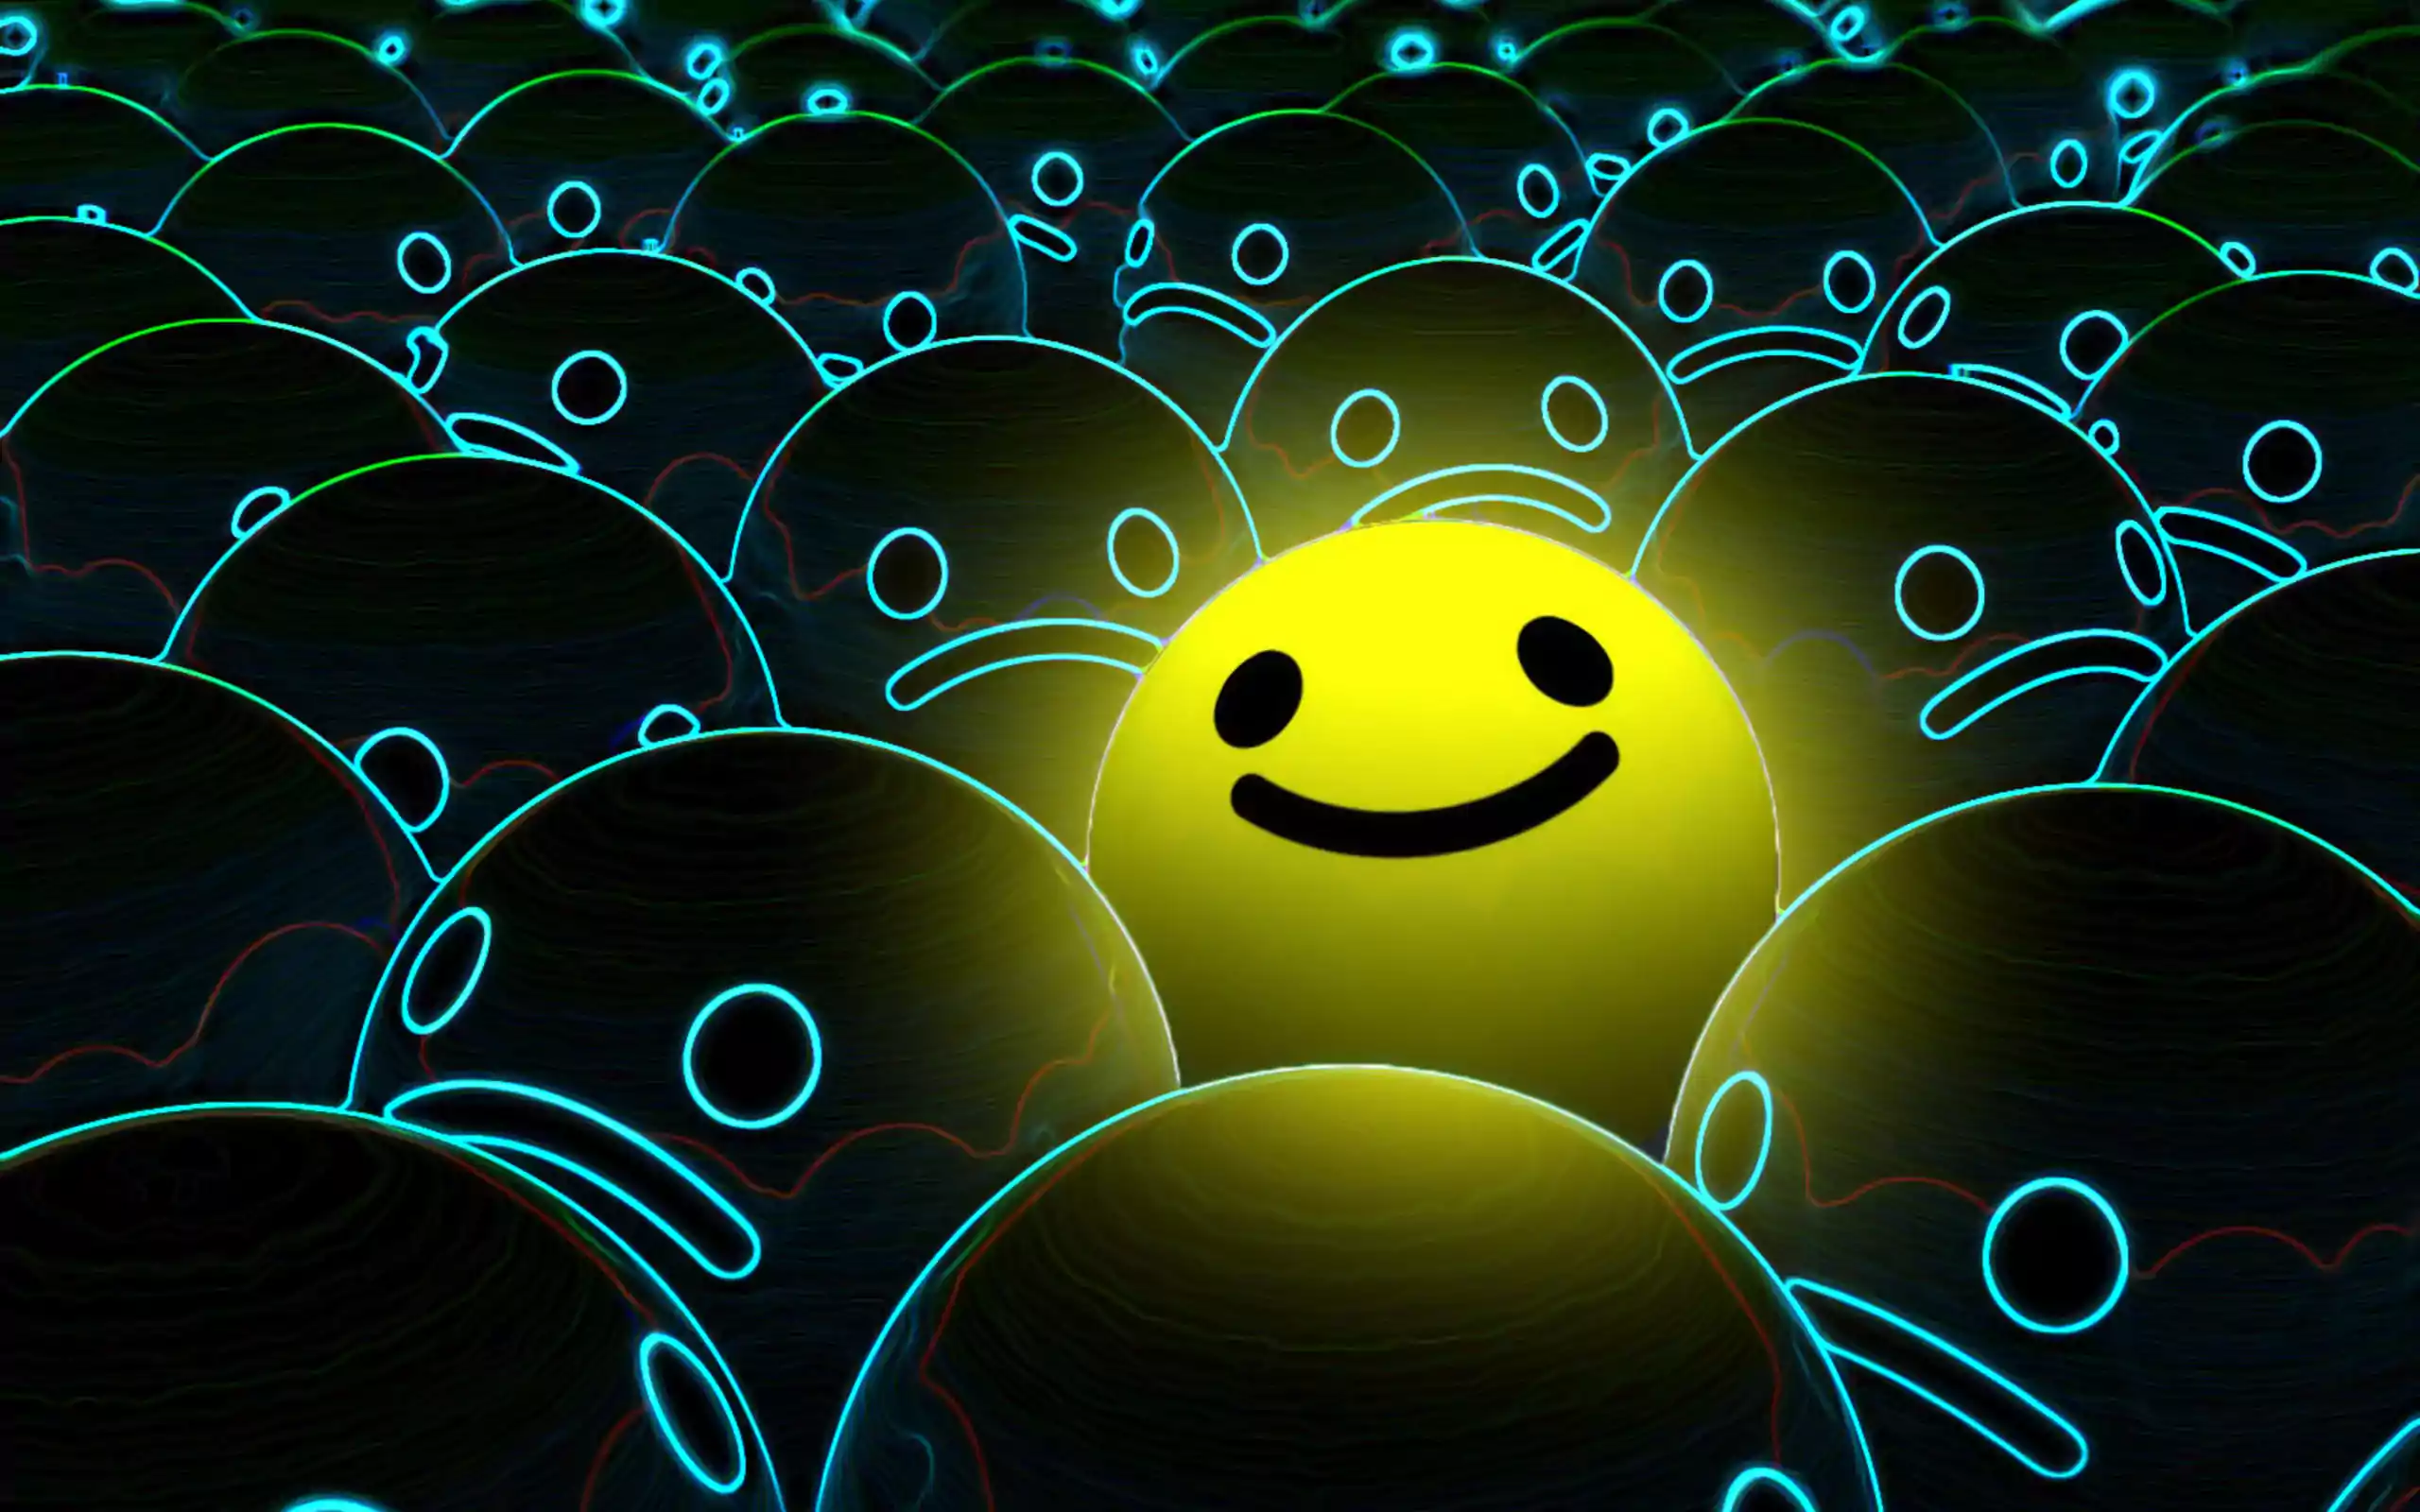 A smiling face on a yellow ball surrounded by blue balls - Smiley